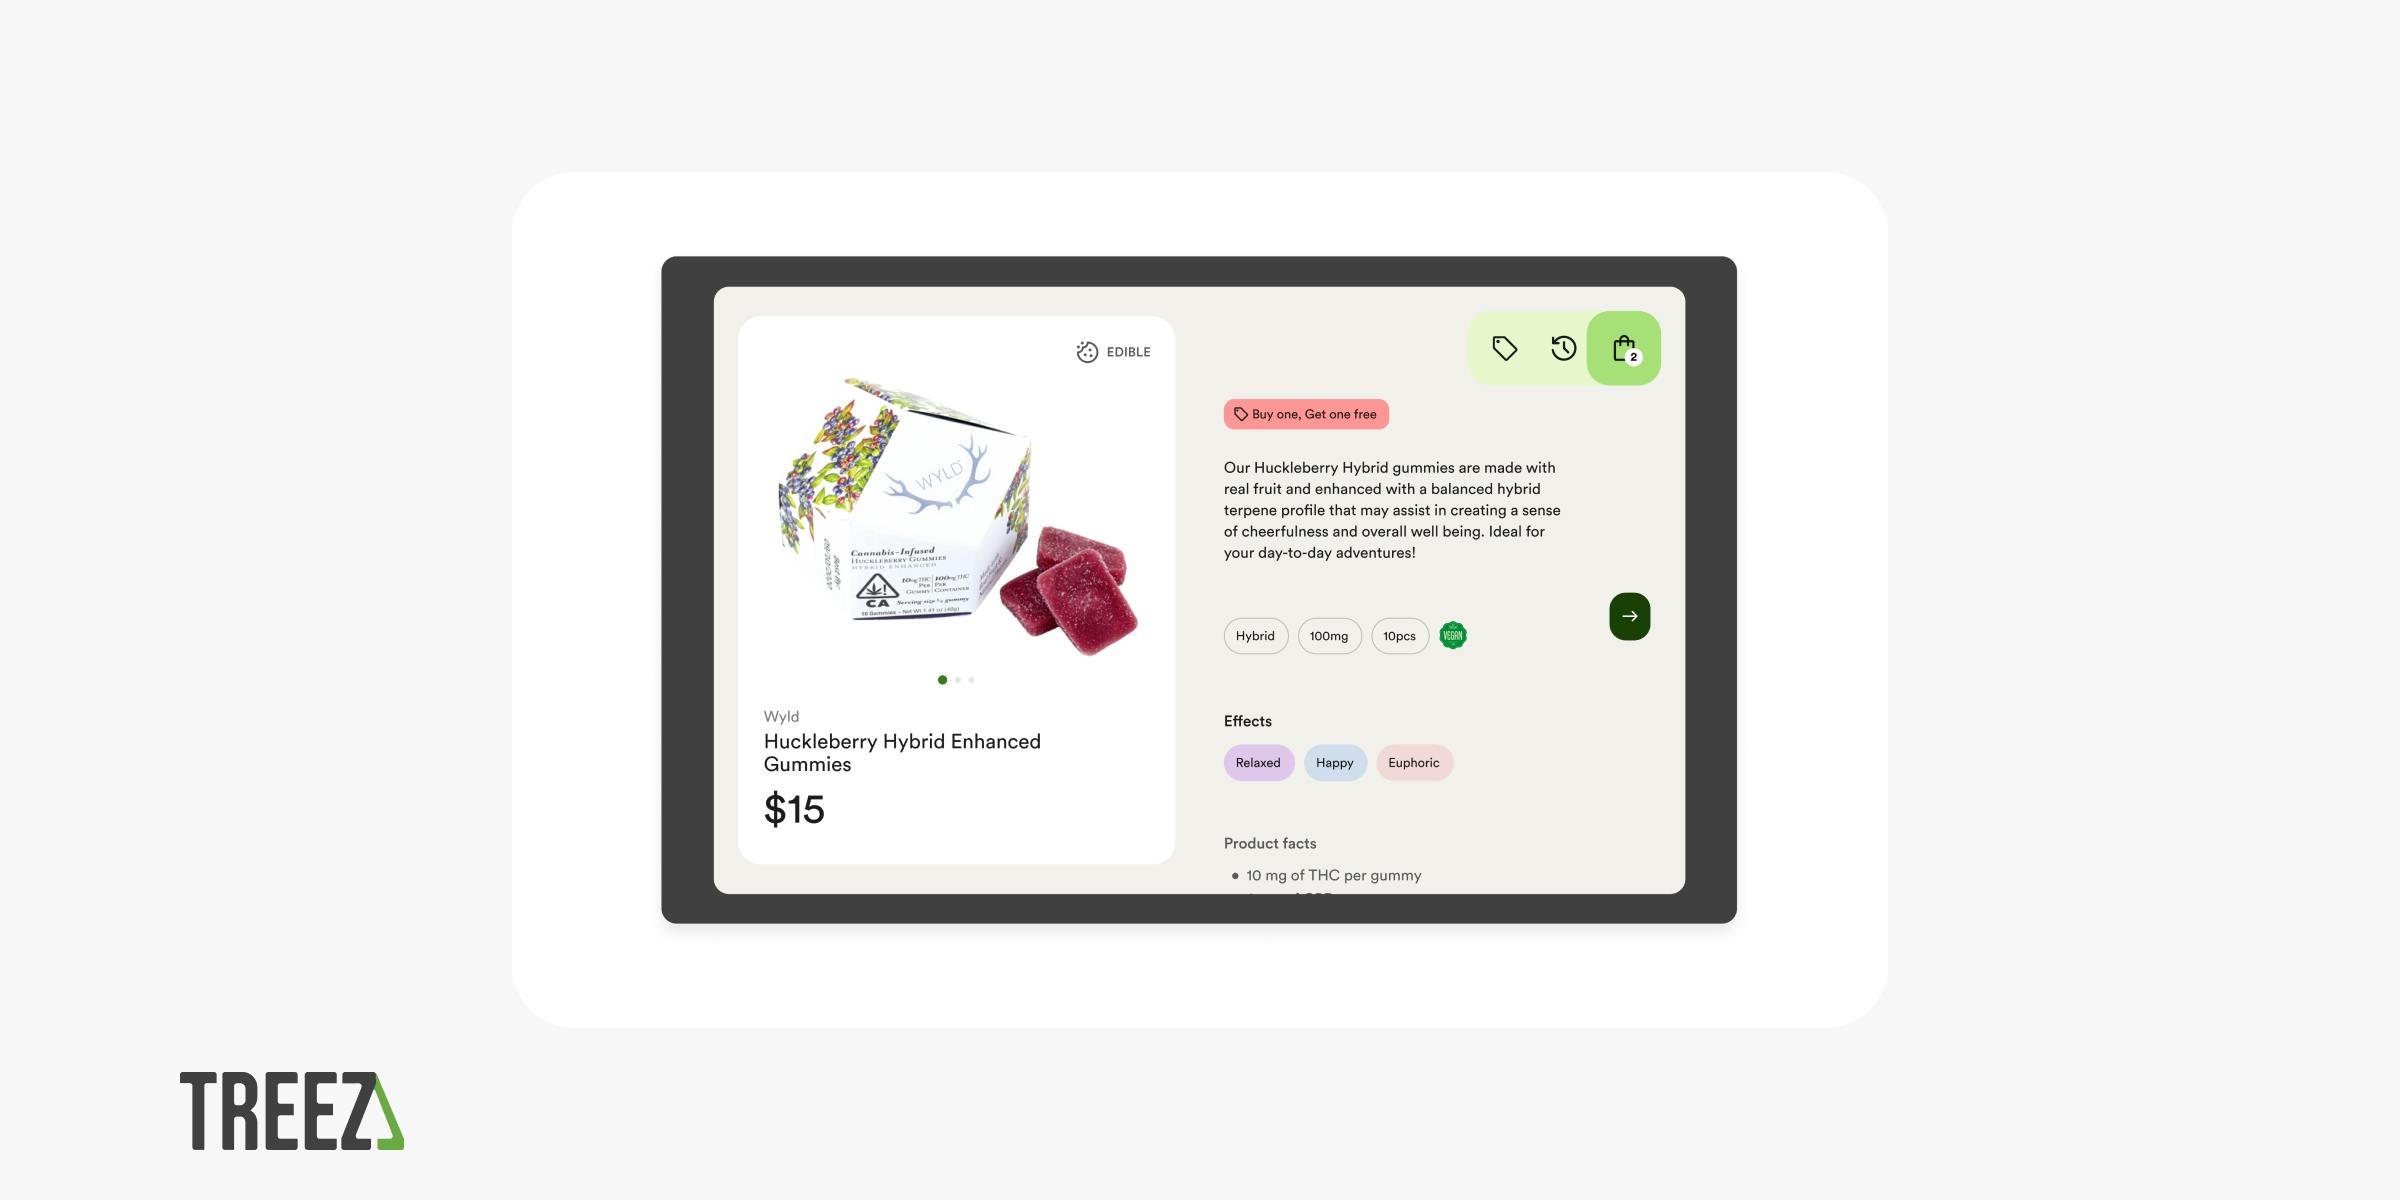 A screenshot visualization shows a point of sale ecommerce page for Huckleberry Hybrid Enhanced Gummies for sale. There's an appetizing photo of the edibles, plus flavor and effects profiles and an ingredients list. 